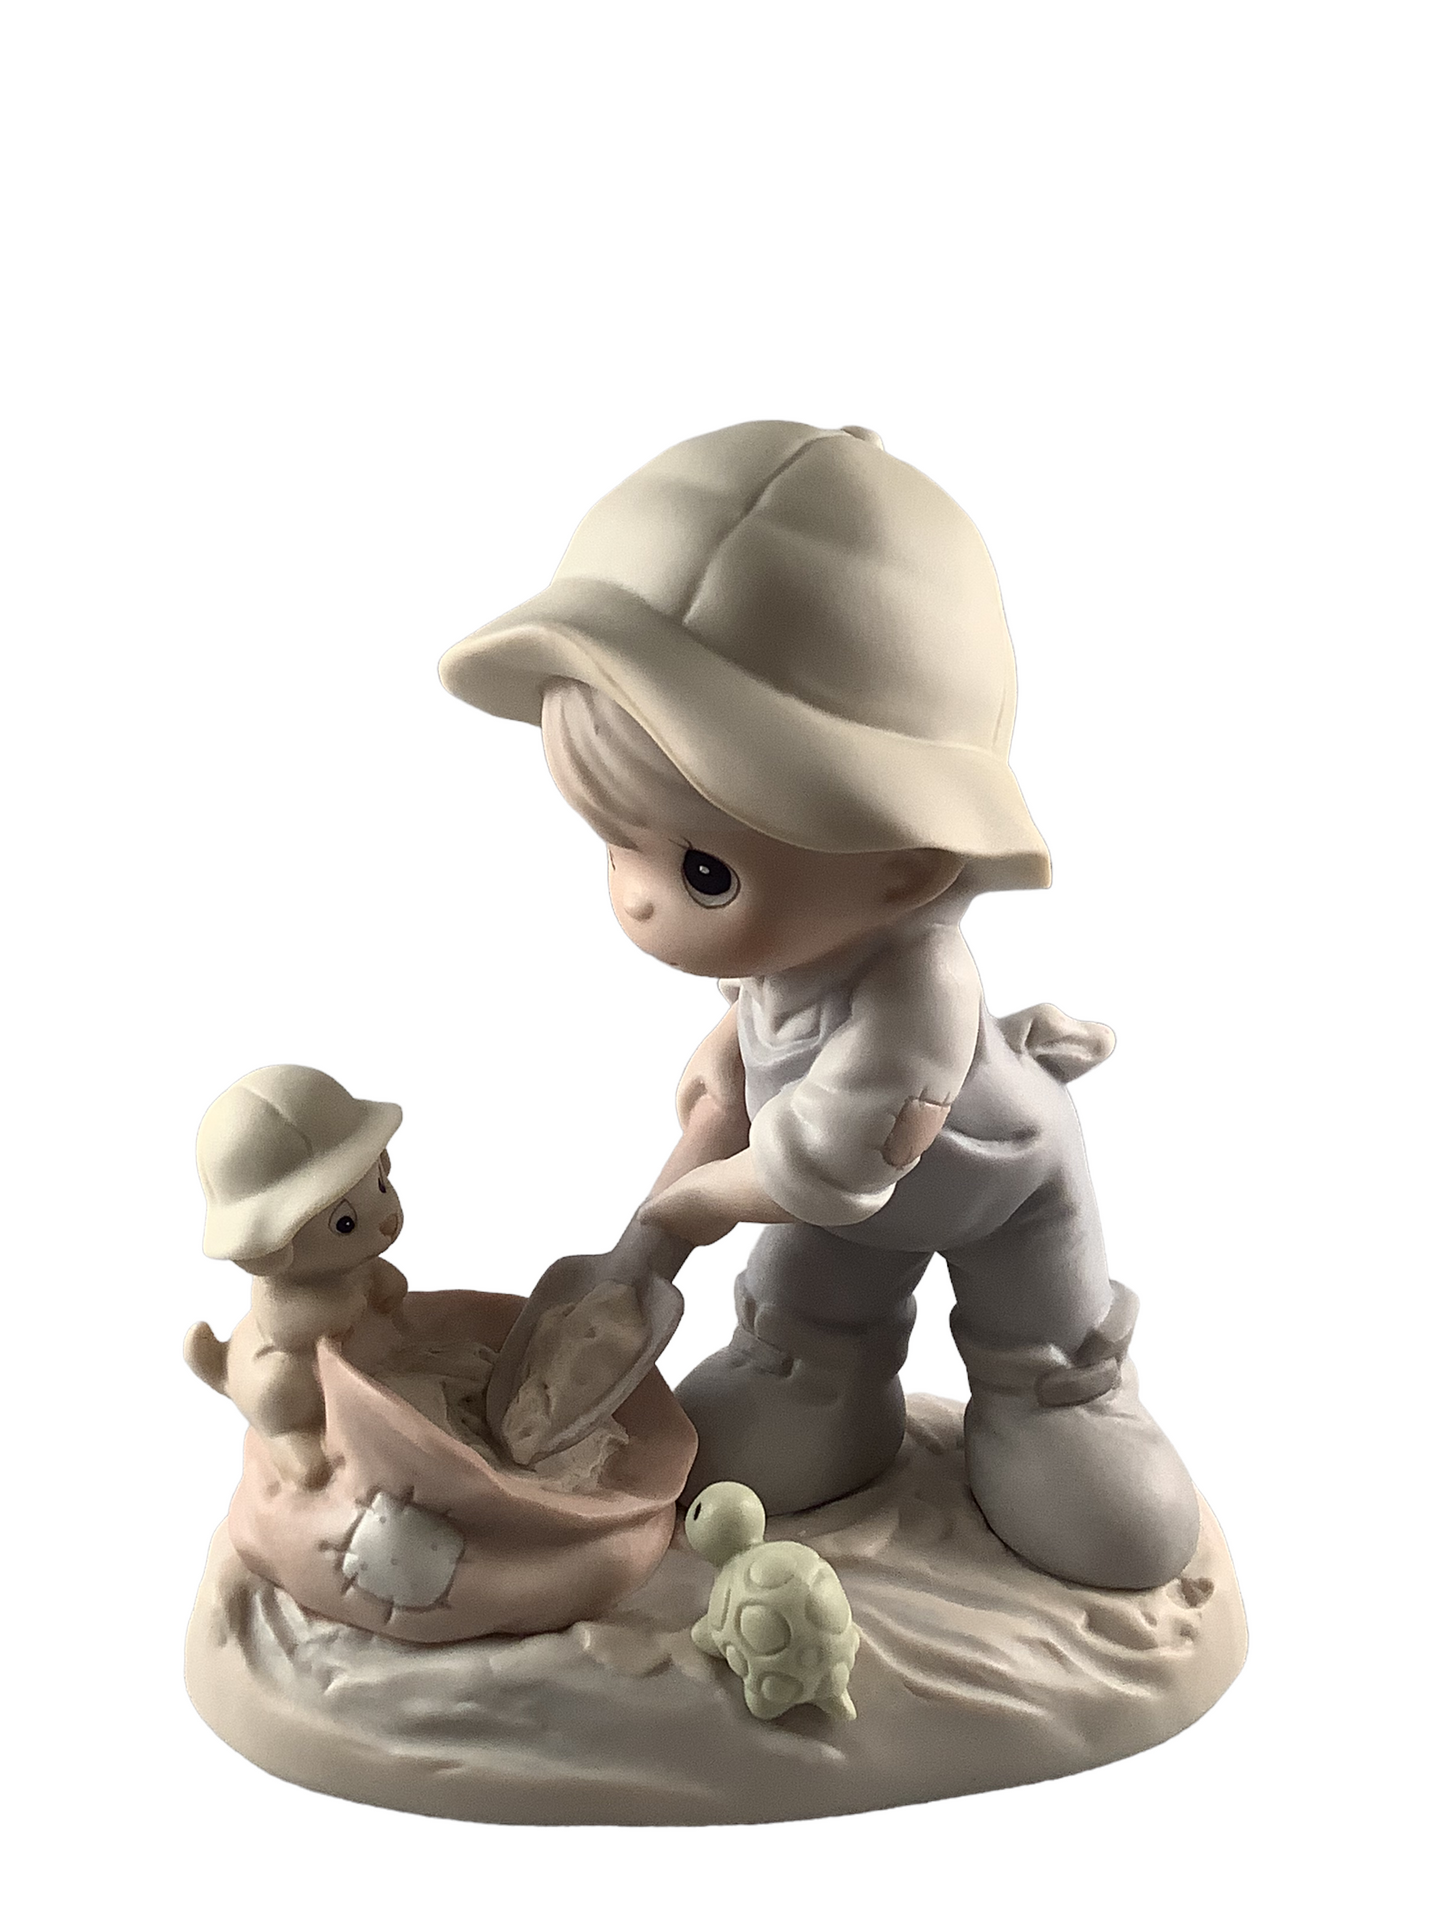 Nothing Can Dampen The Spirit Of Caring - Precious Moment Figurine